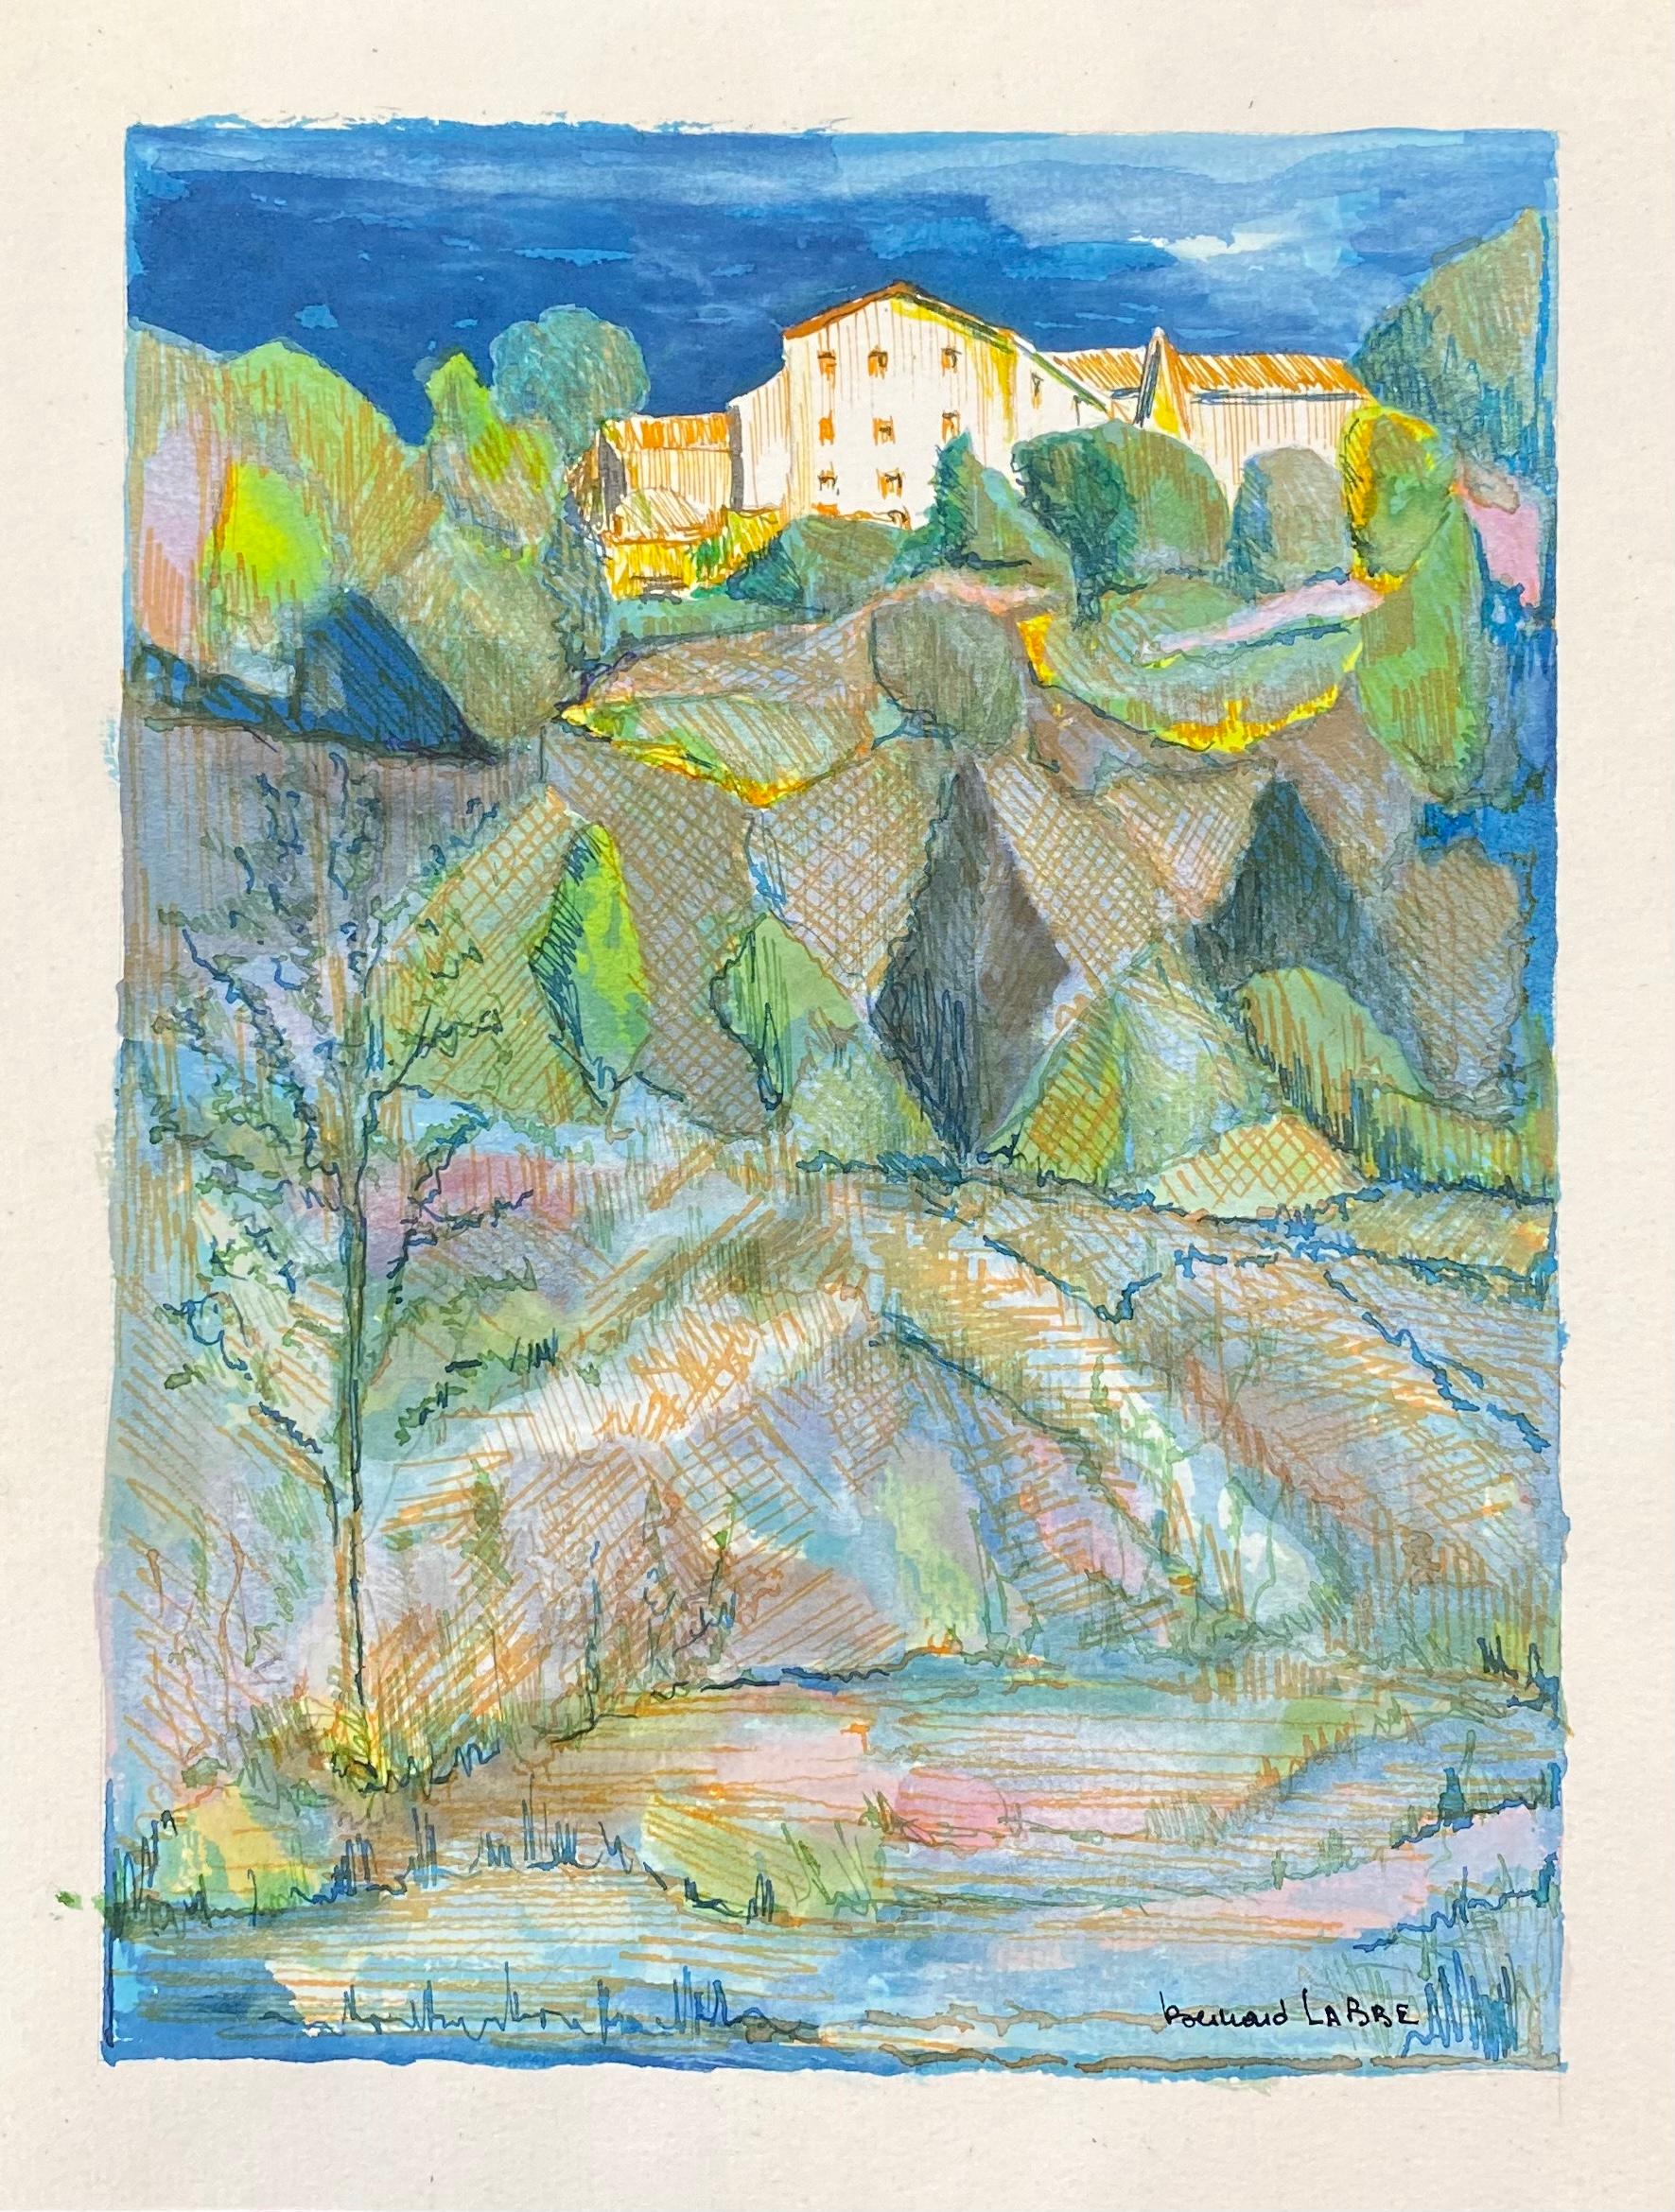 French Landscape
by Bernard Labbe (French mid 20th century)
Signed original watercolour/ gouache painting on artist paper, unframed
Size: 10 x 7.75 inches
Condition: very good and ready to be enjoyed. 

Provenance: the artists atelier/ studio,